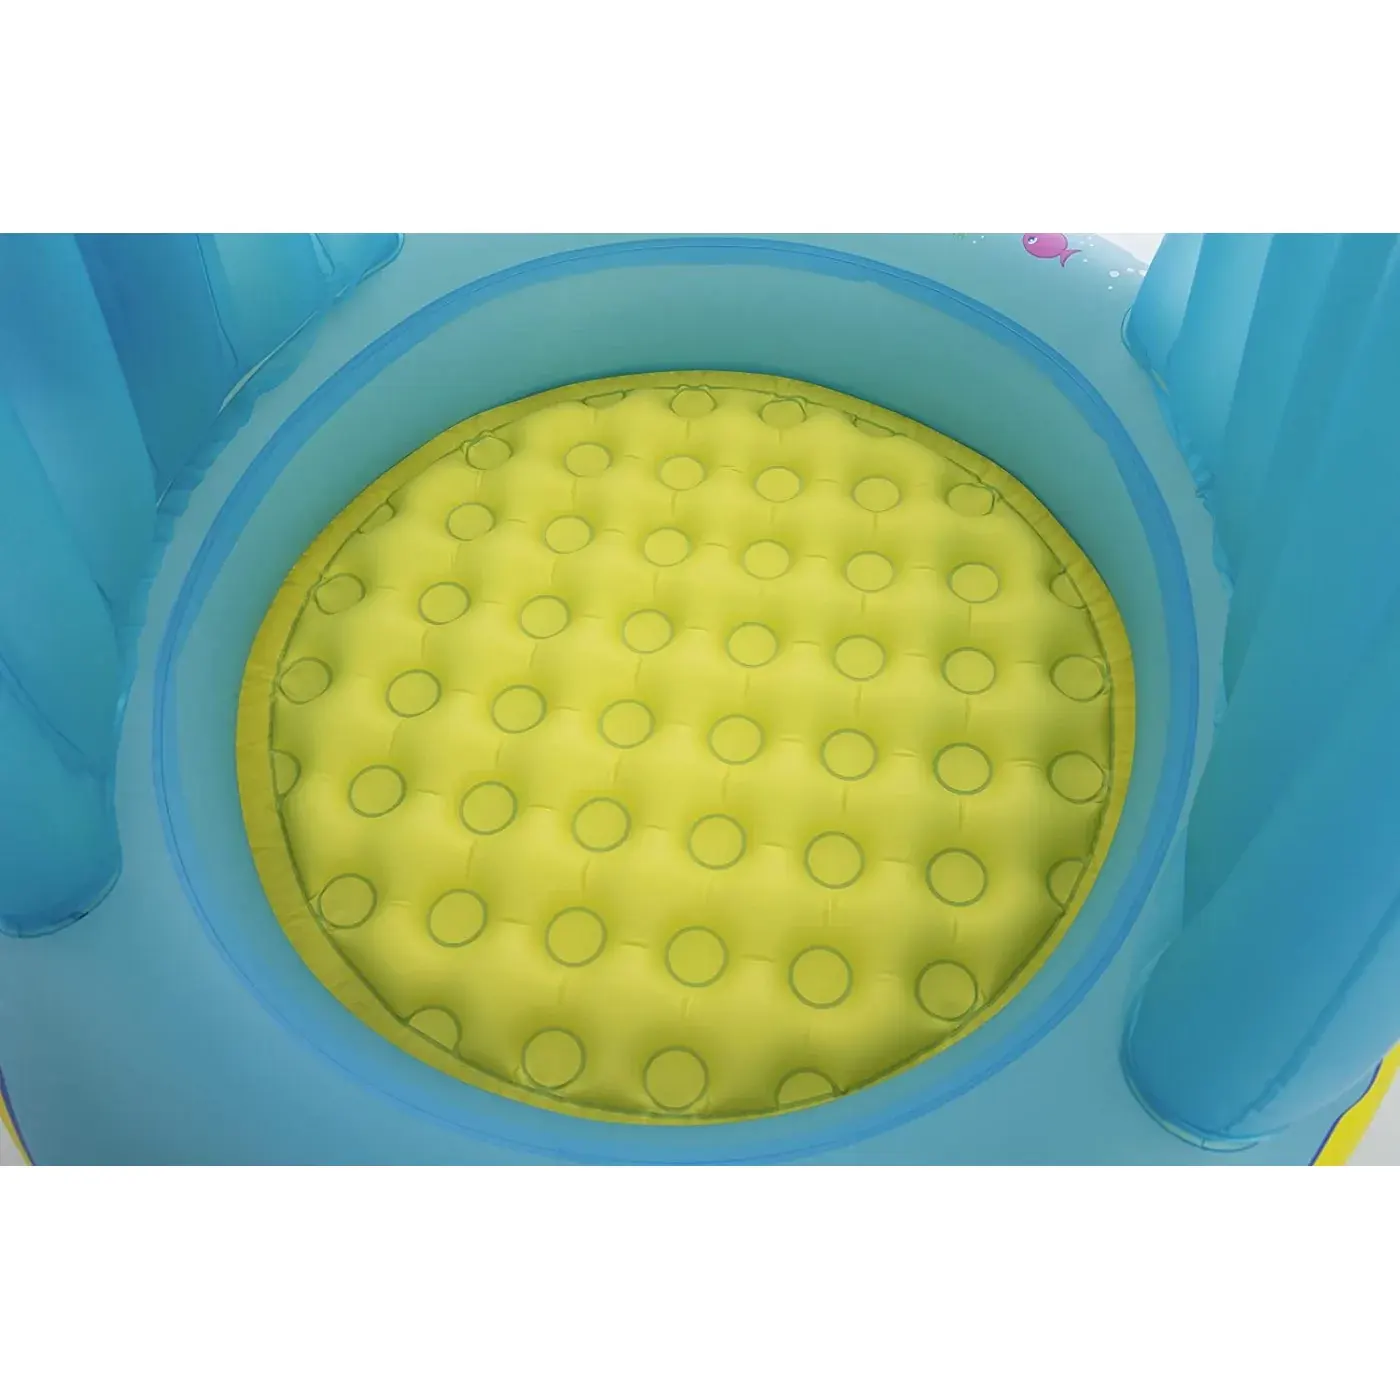 Bestway Inflatable Swimming Pool, 109 x 96 x 104 cm, Turtle design, Colors, 52219